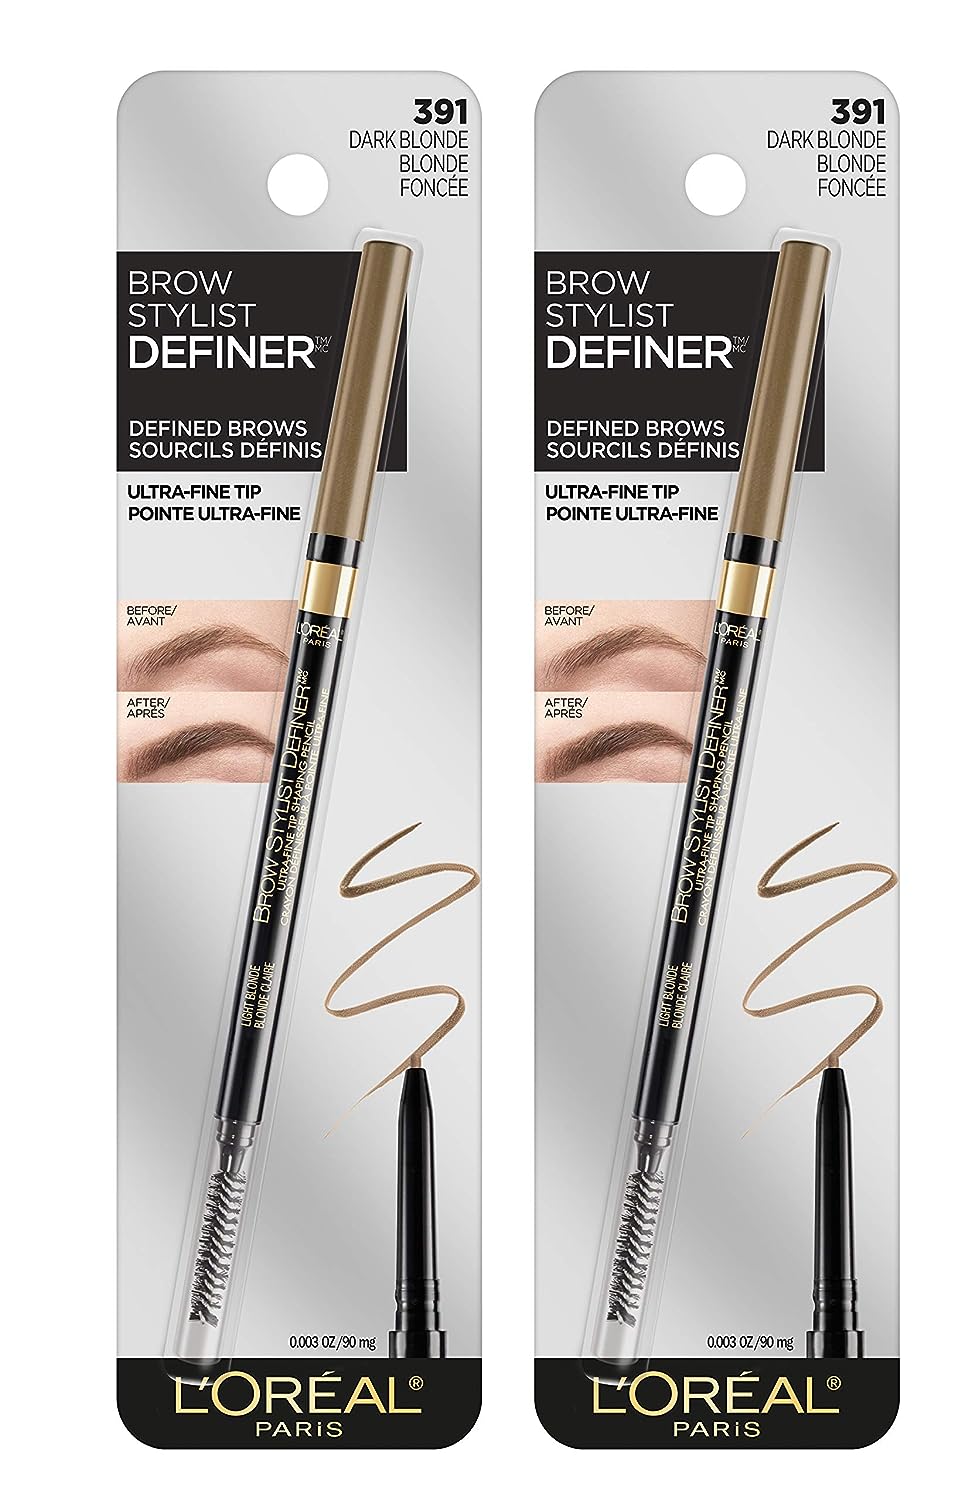 L’Oréal Paris Makeup Brow Stylist Definer Waterproof Eyebrow Pencil, Ultra-Fine Mechanical Pencil, Draws Tiny Brow Hairs and Fills in Sparse Areas and Gaps, Dark Blonde, 0.003  (Pack of 2)